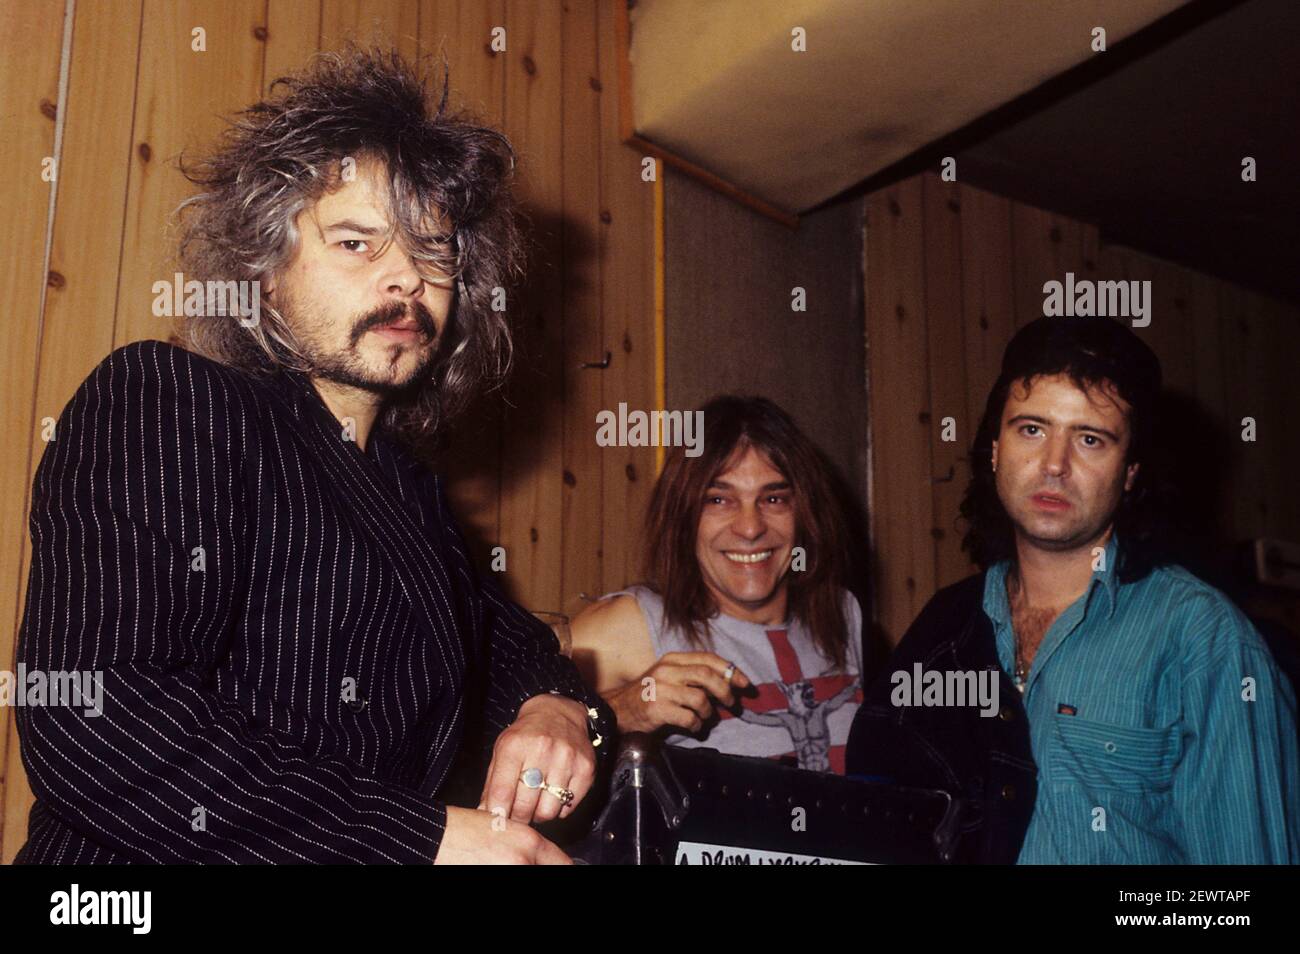 Phil 'Philthy Animal' Taylor, Michael 'Wurzel' Burston and Phil 'Wizzo'  Campbell of Motorhead during a photoshoot in the recording studio. London,   | usage worldwide Stock Photo - Alamy